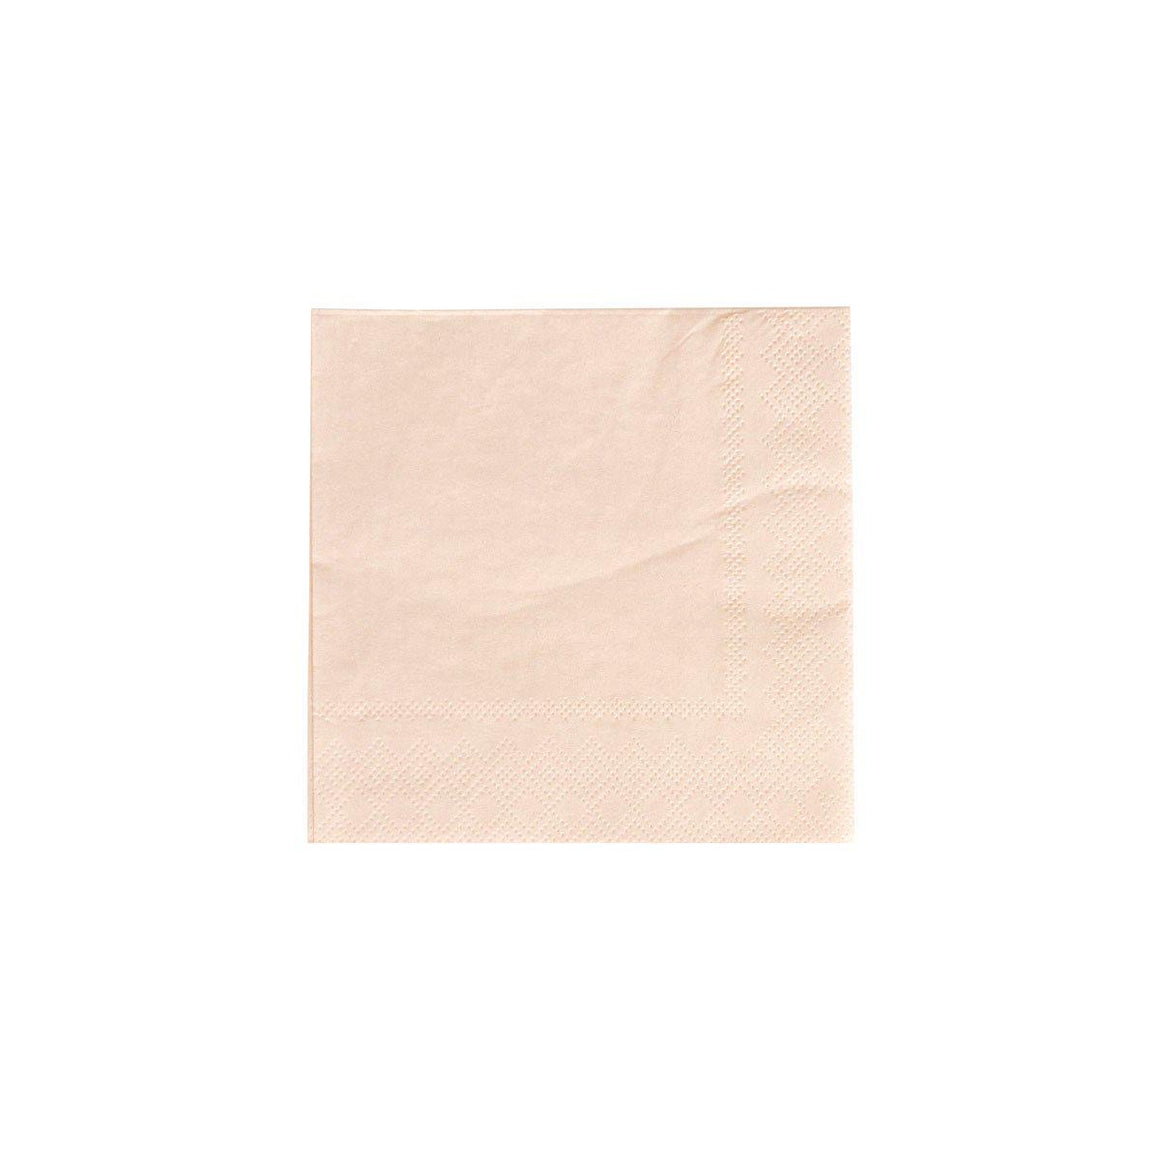 NAPKINS SMALL - PINK BLUSH BALLET NUDE OH HAPPY DAY